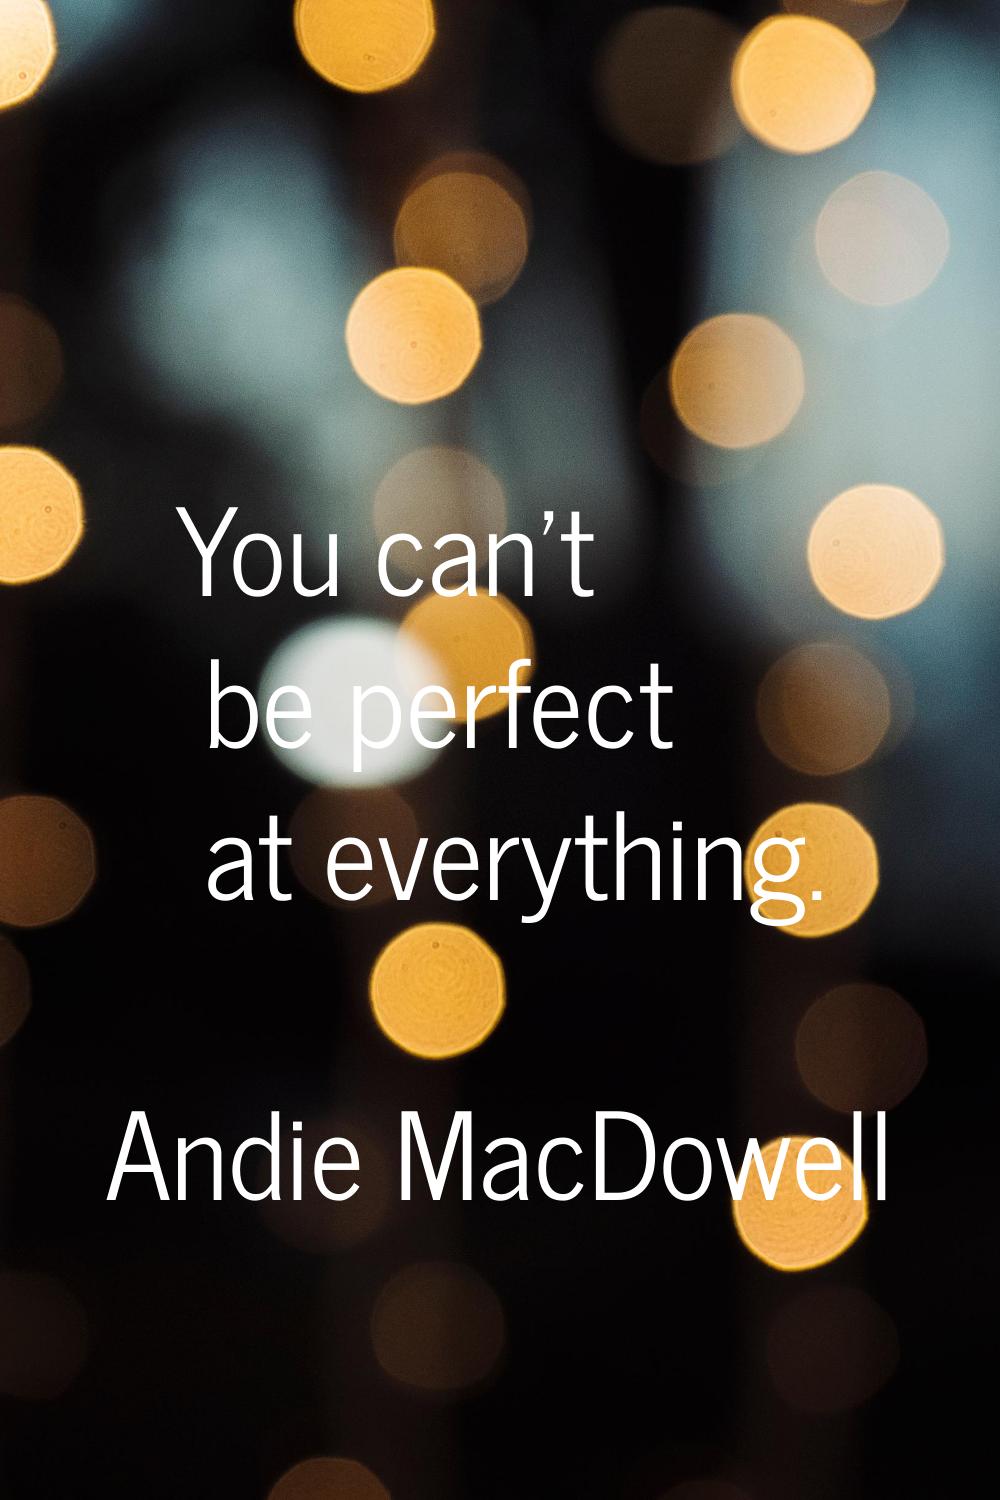 You can't be perfect at everything.